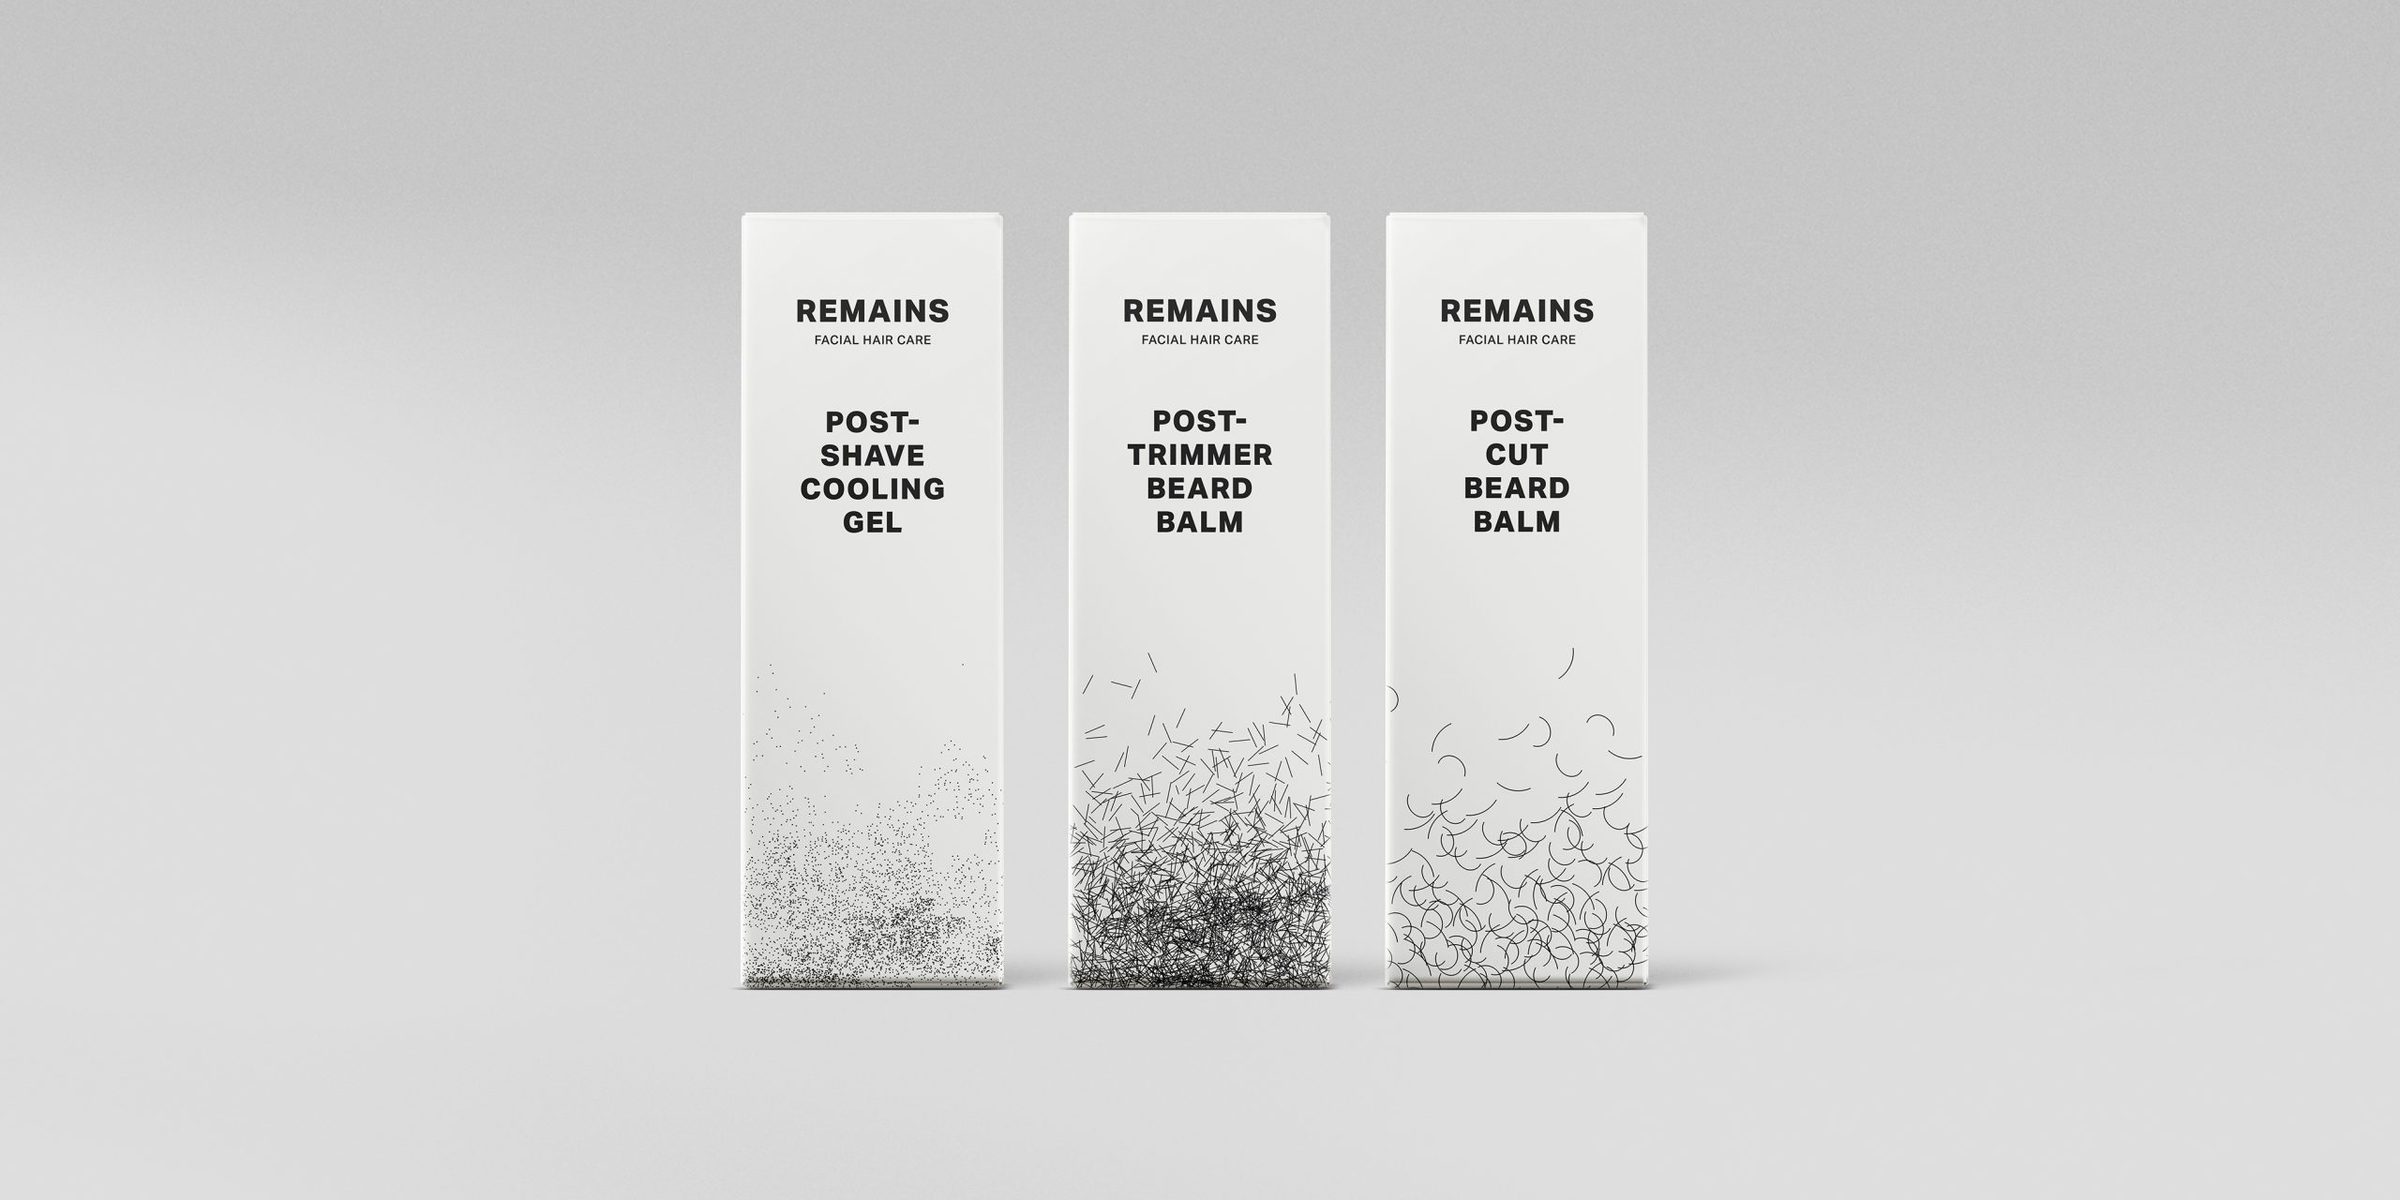 Edgar Kirei – “Remains” Men’s Grooming Products